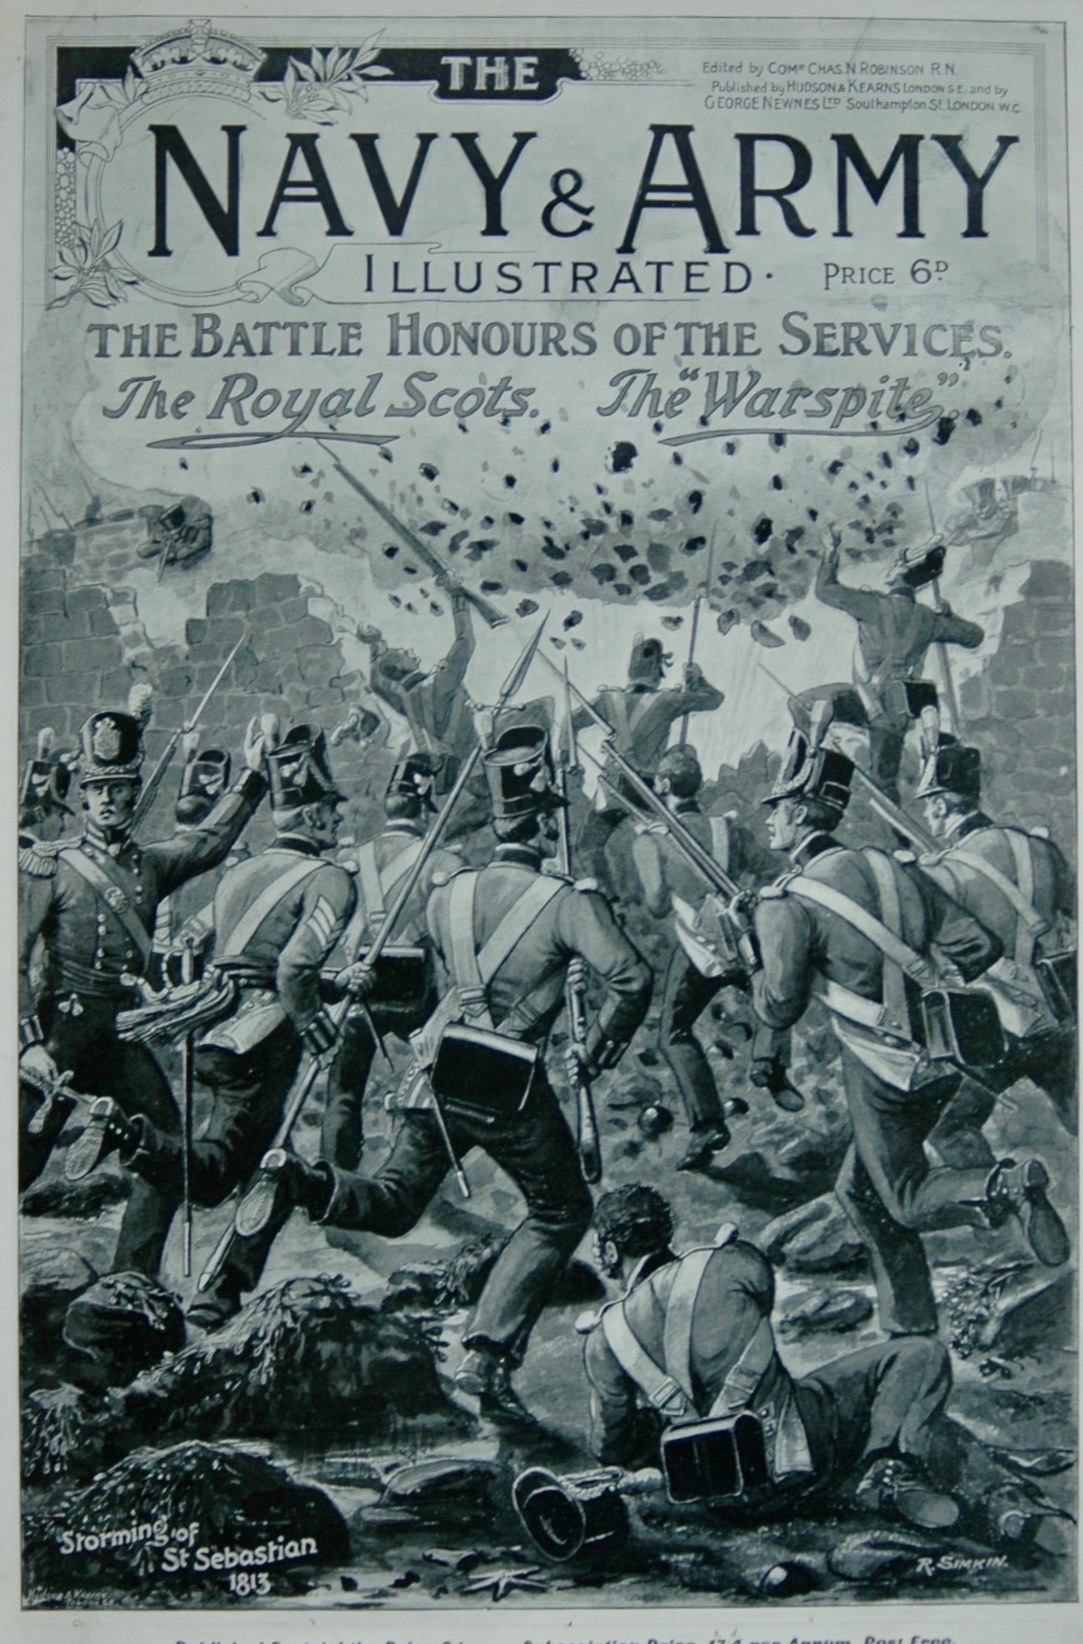 The Battle Honours of the Services - 1897